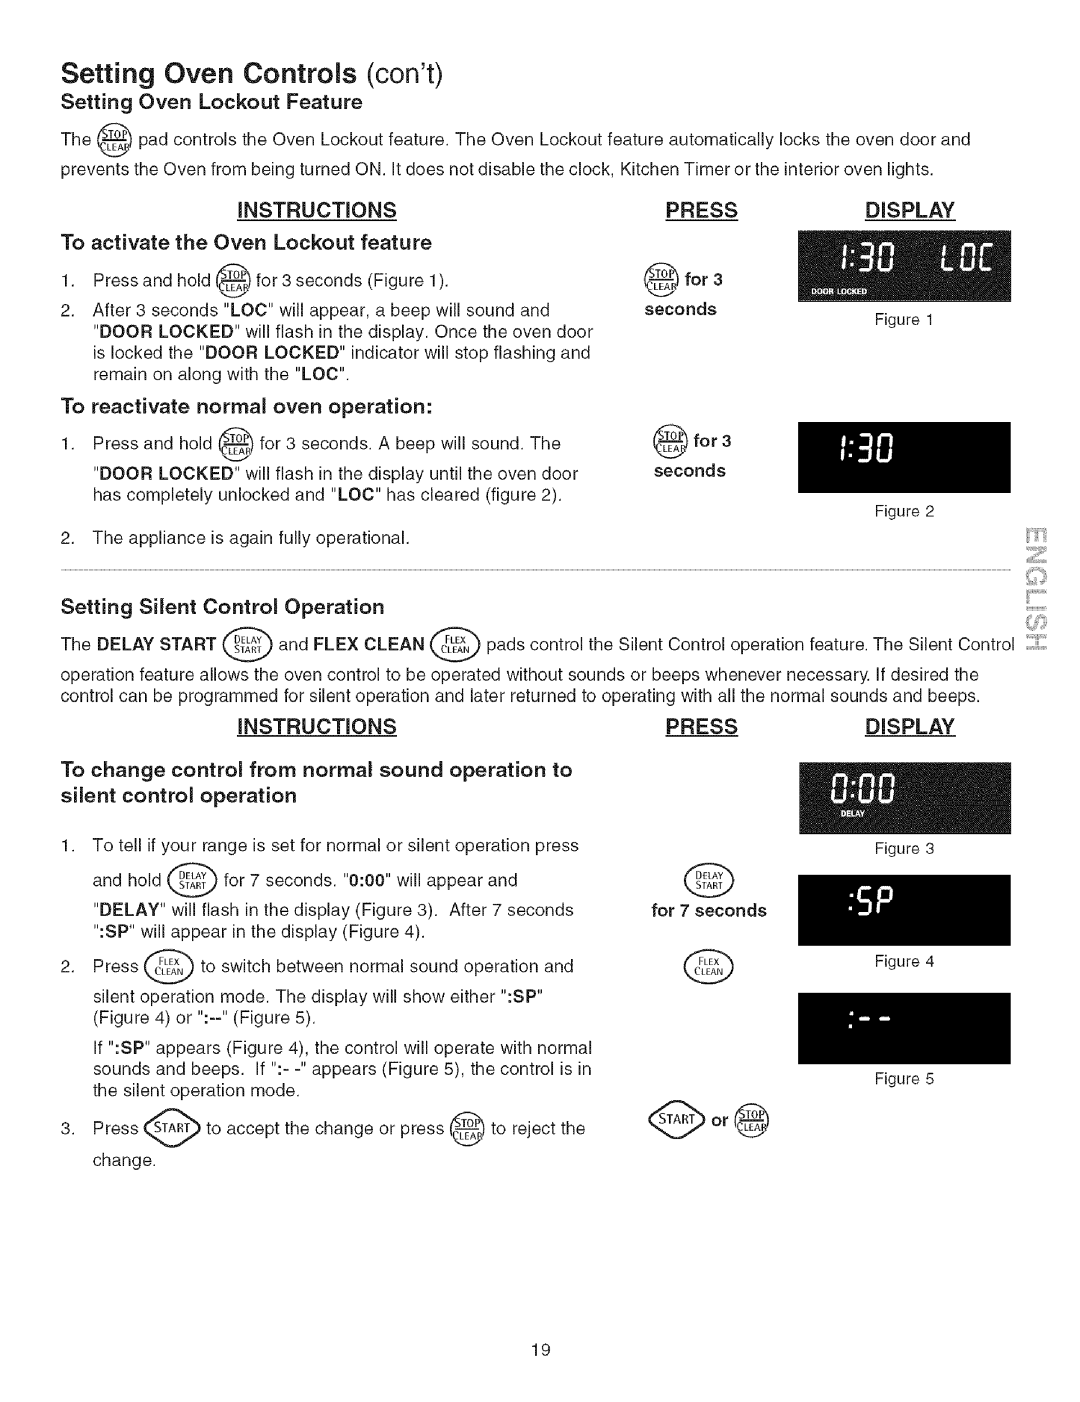 Kenmore 790.3671 Setting Oven Controls cont, Setting Oven Lockout Feature, iNSTRUCTiONS, Press, Display, Instructions 